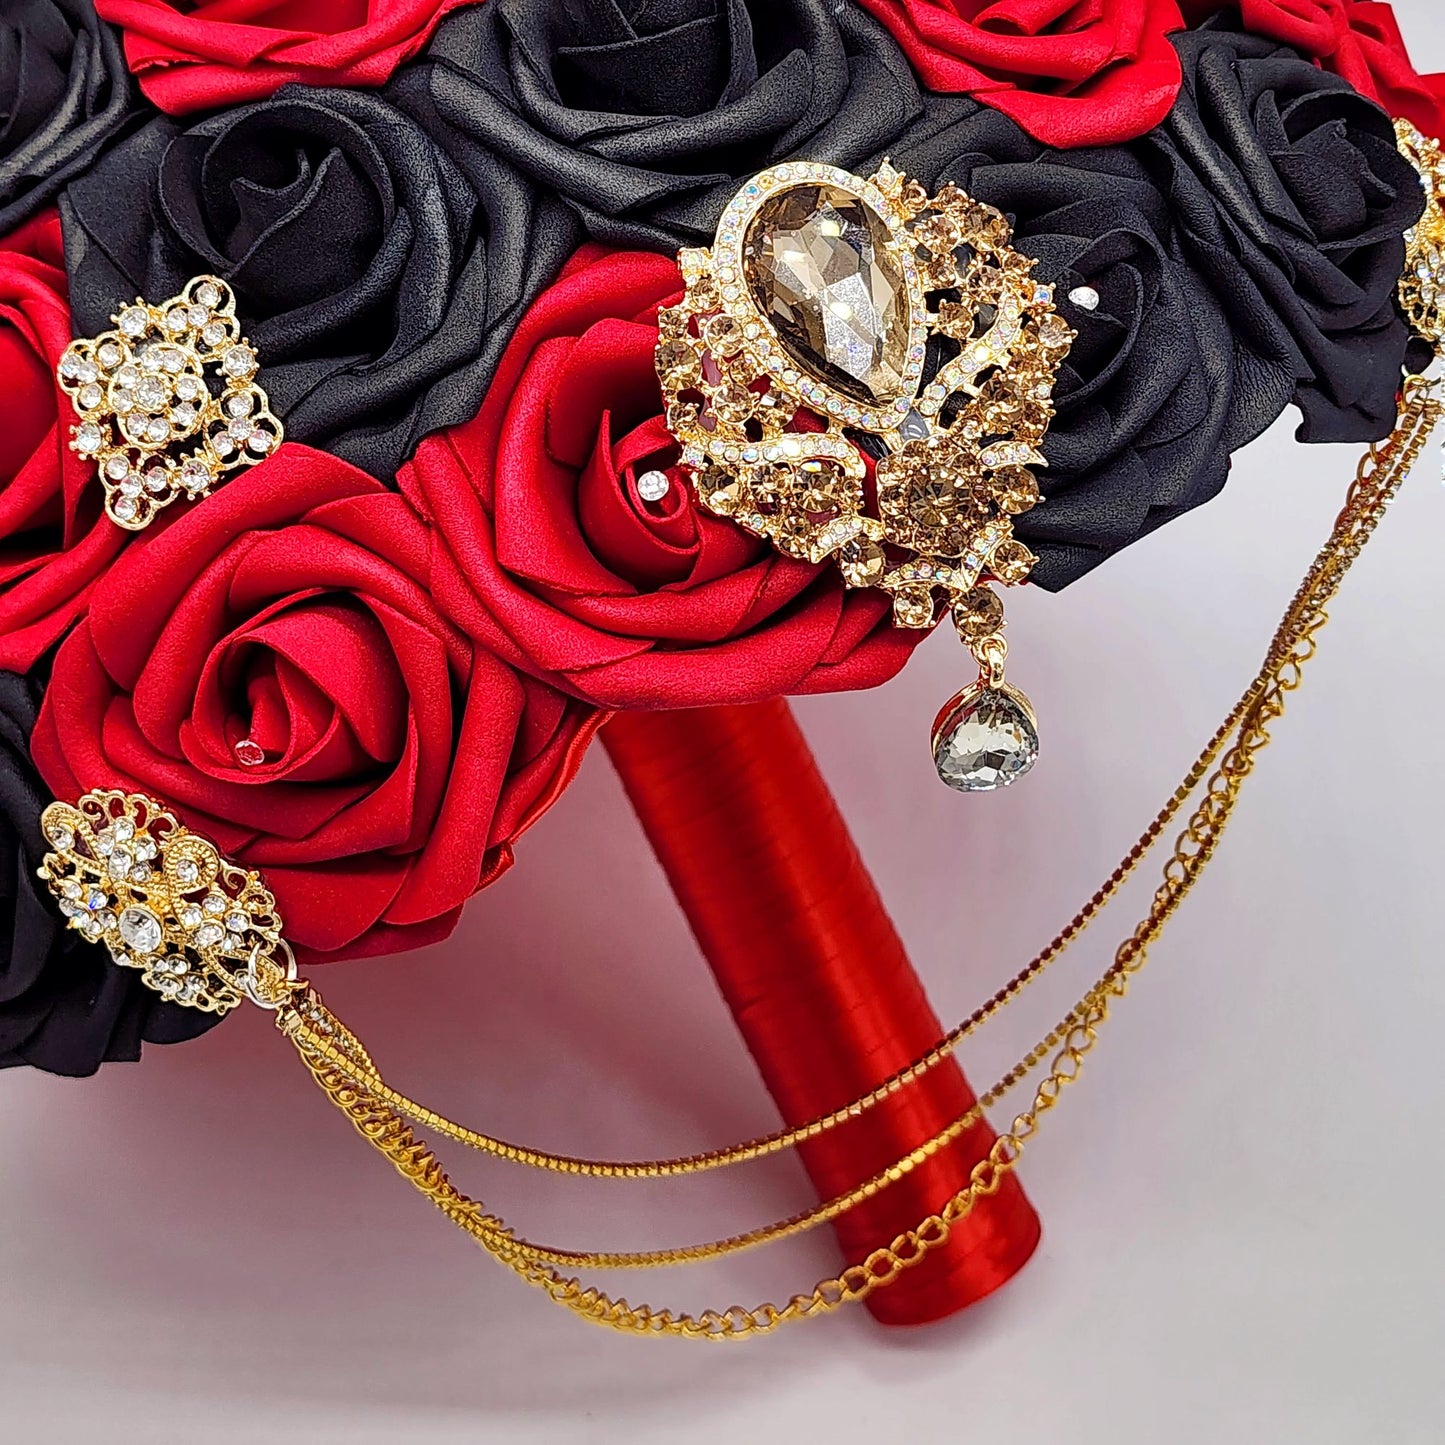 Red and Black Bridal Bouquet With Cascading Gold Chains and Brooches